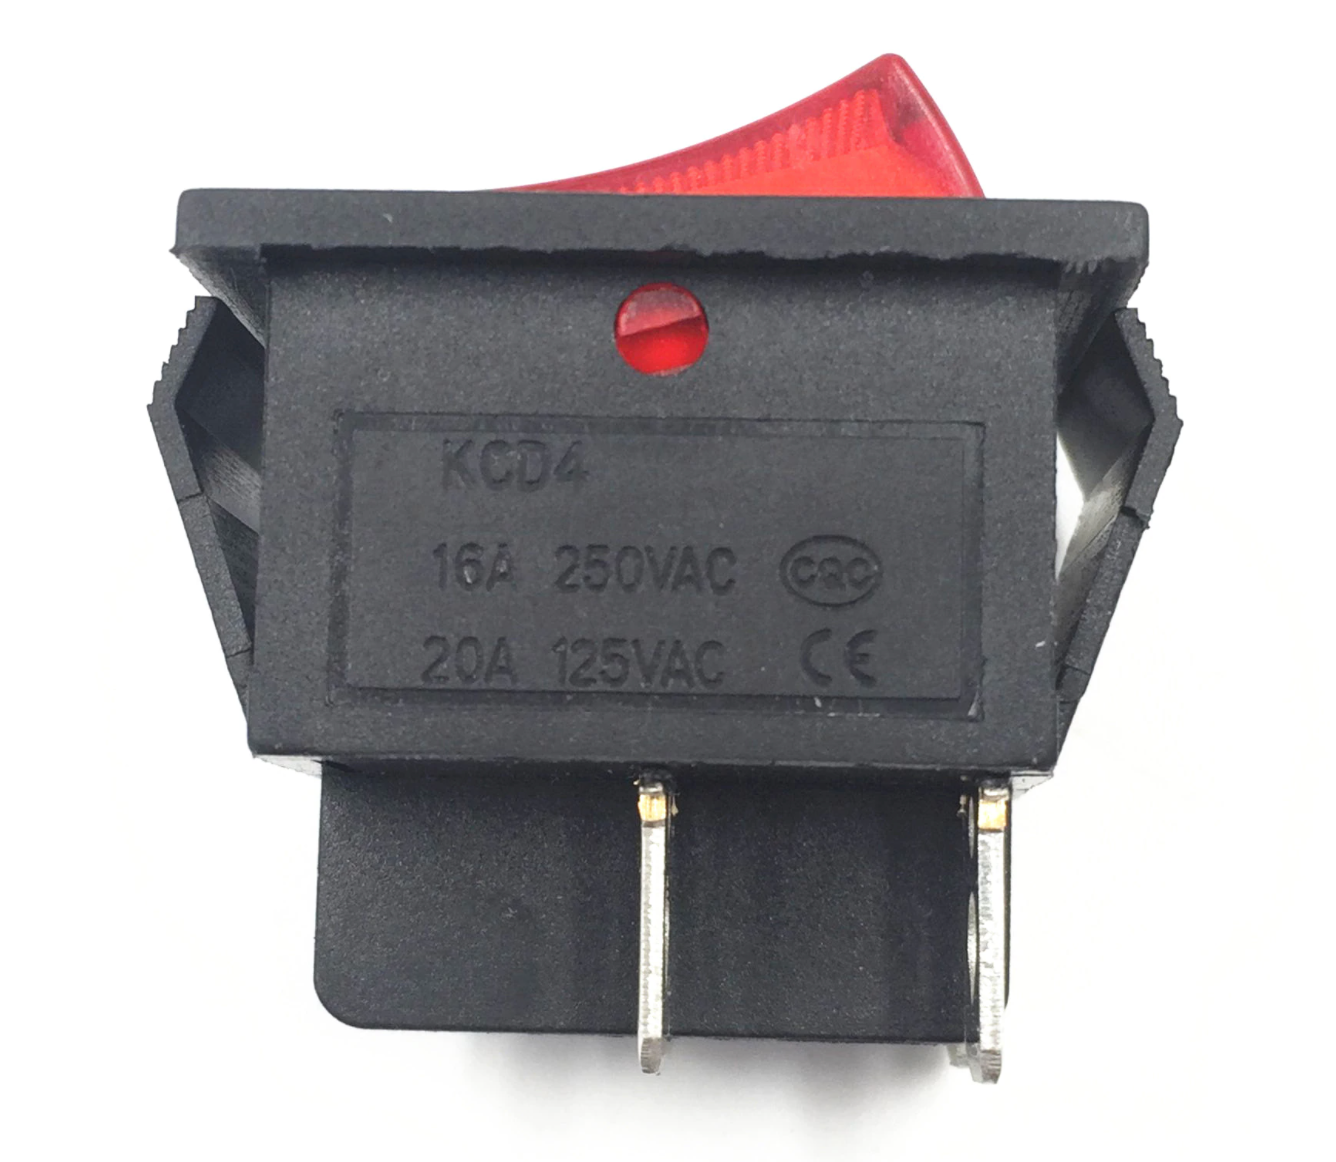 Power Switch I/O 4 Pins With Light 16A 250VAC 20A 125VAC KCD4 DPST Rocker Latching